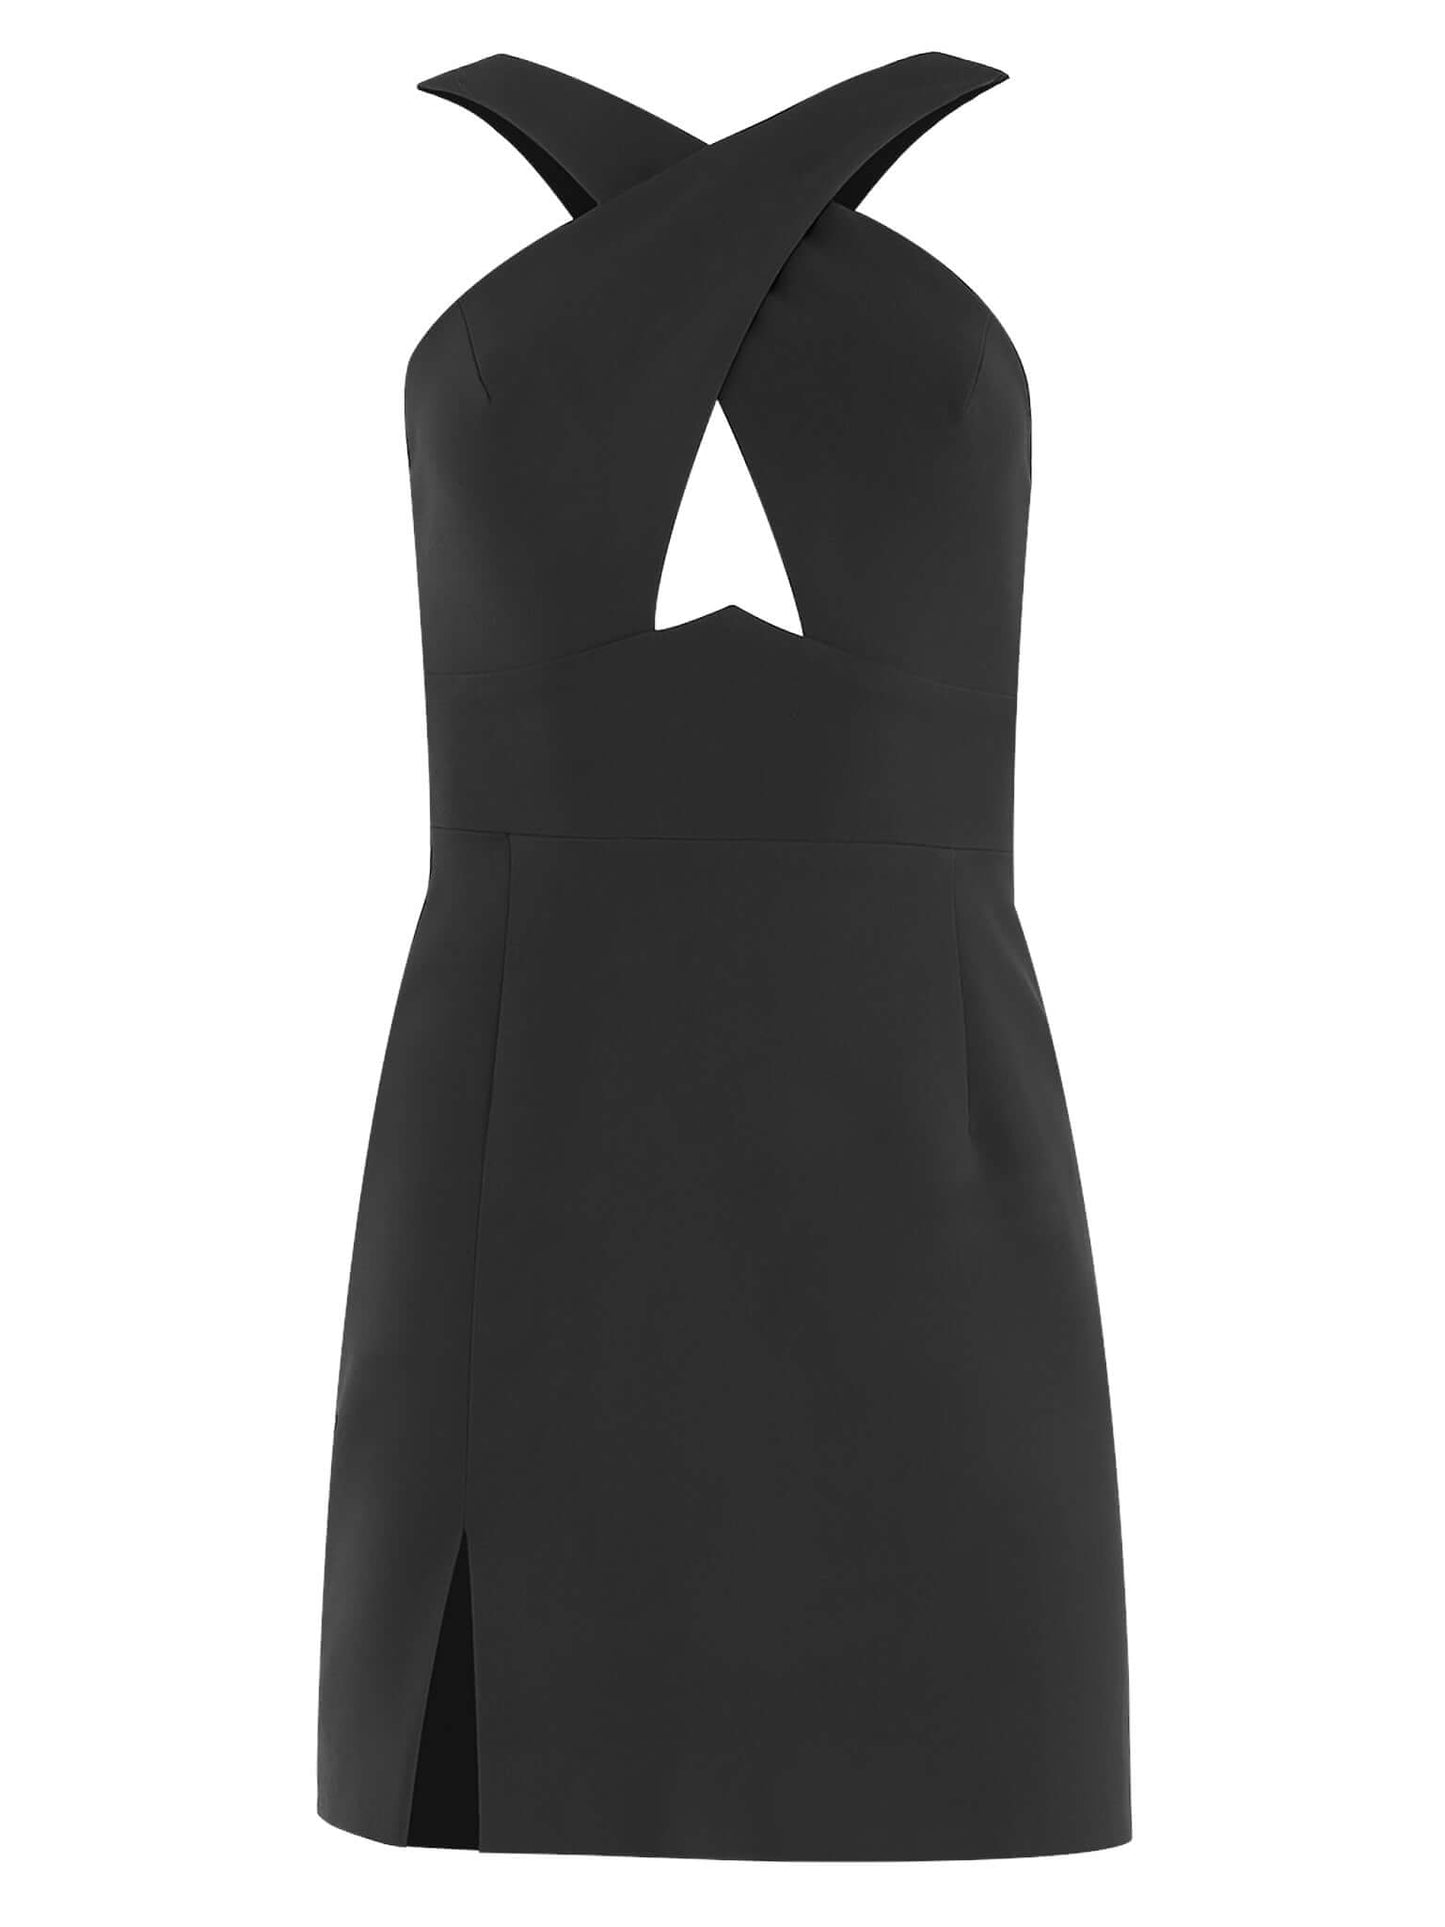 Tia Dorraine Burning Desire Cross-Neck Cut Out Mini Dress- Black This mini dress arrives with a cross-neck design and a deconstructed aesthetic thanks to the sexy cut-out waist detail. The dress also includes a playful front slit detail and is fully lined